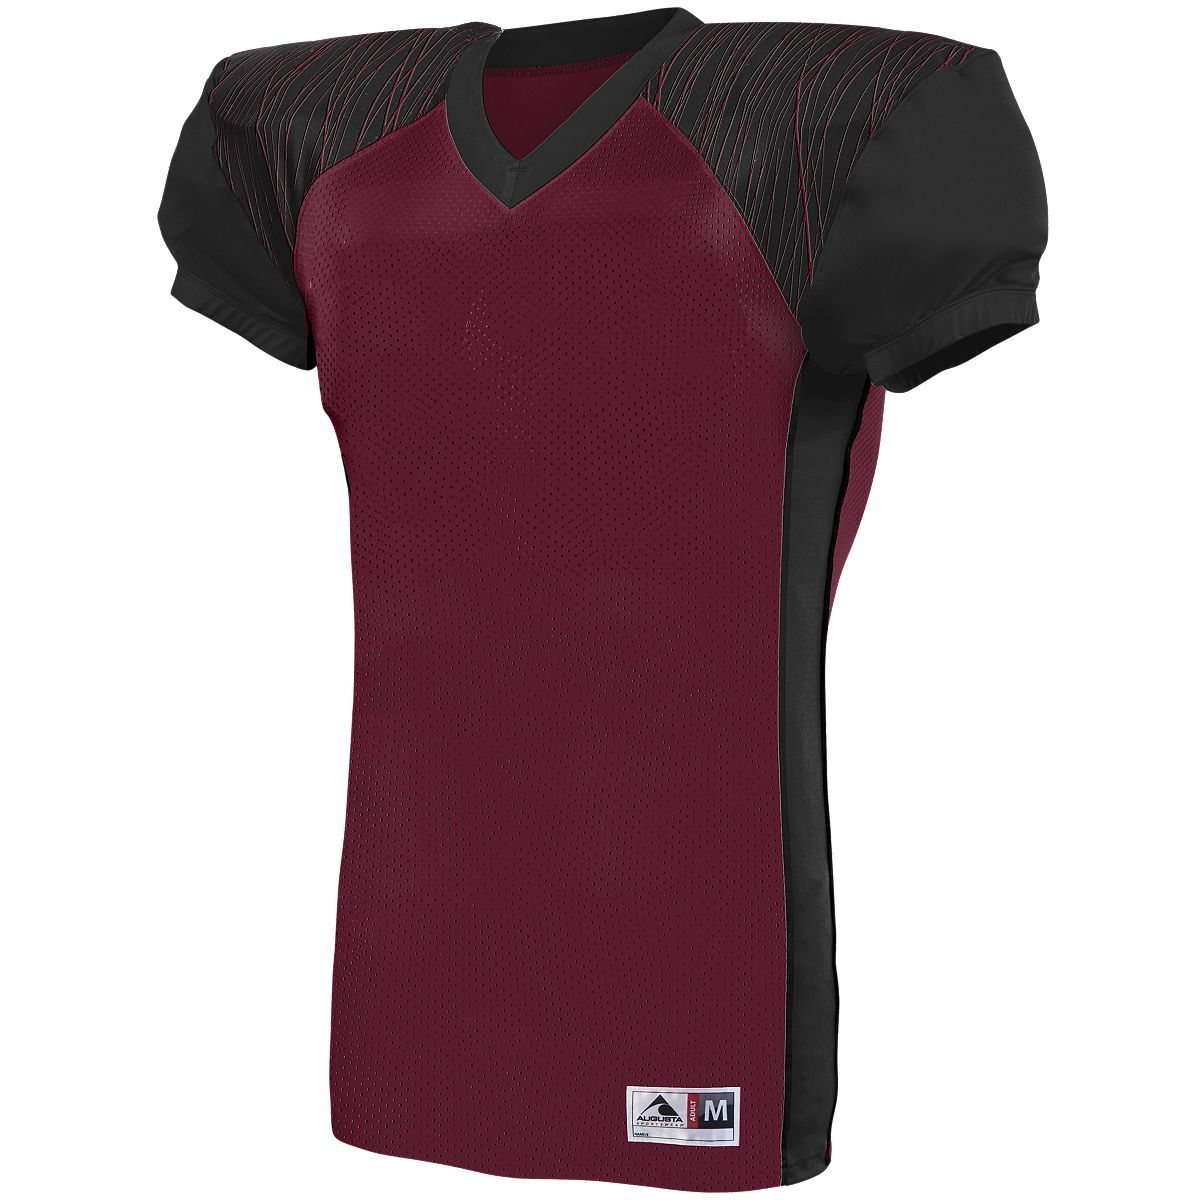 Augusta Sportswear Zone Play Jersey in Maroon/Black/Maroon Print  -Part of the Adult, Adult-Jersey, Augusta-Products, Football, Shirts, All-Sports, All-Sports-1 product lines at KanaleyCreations.com